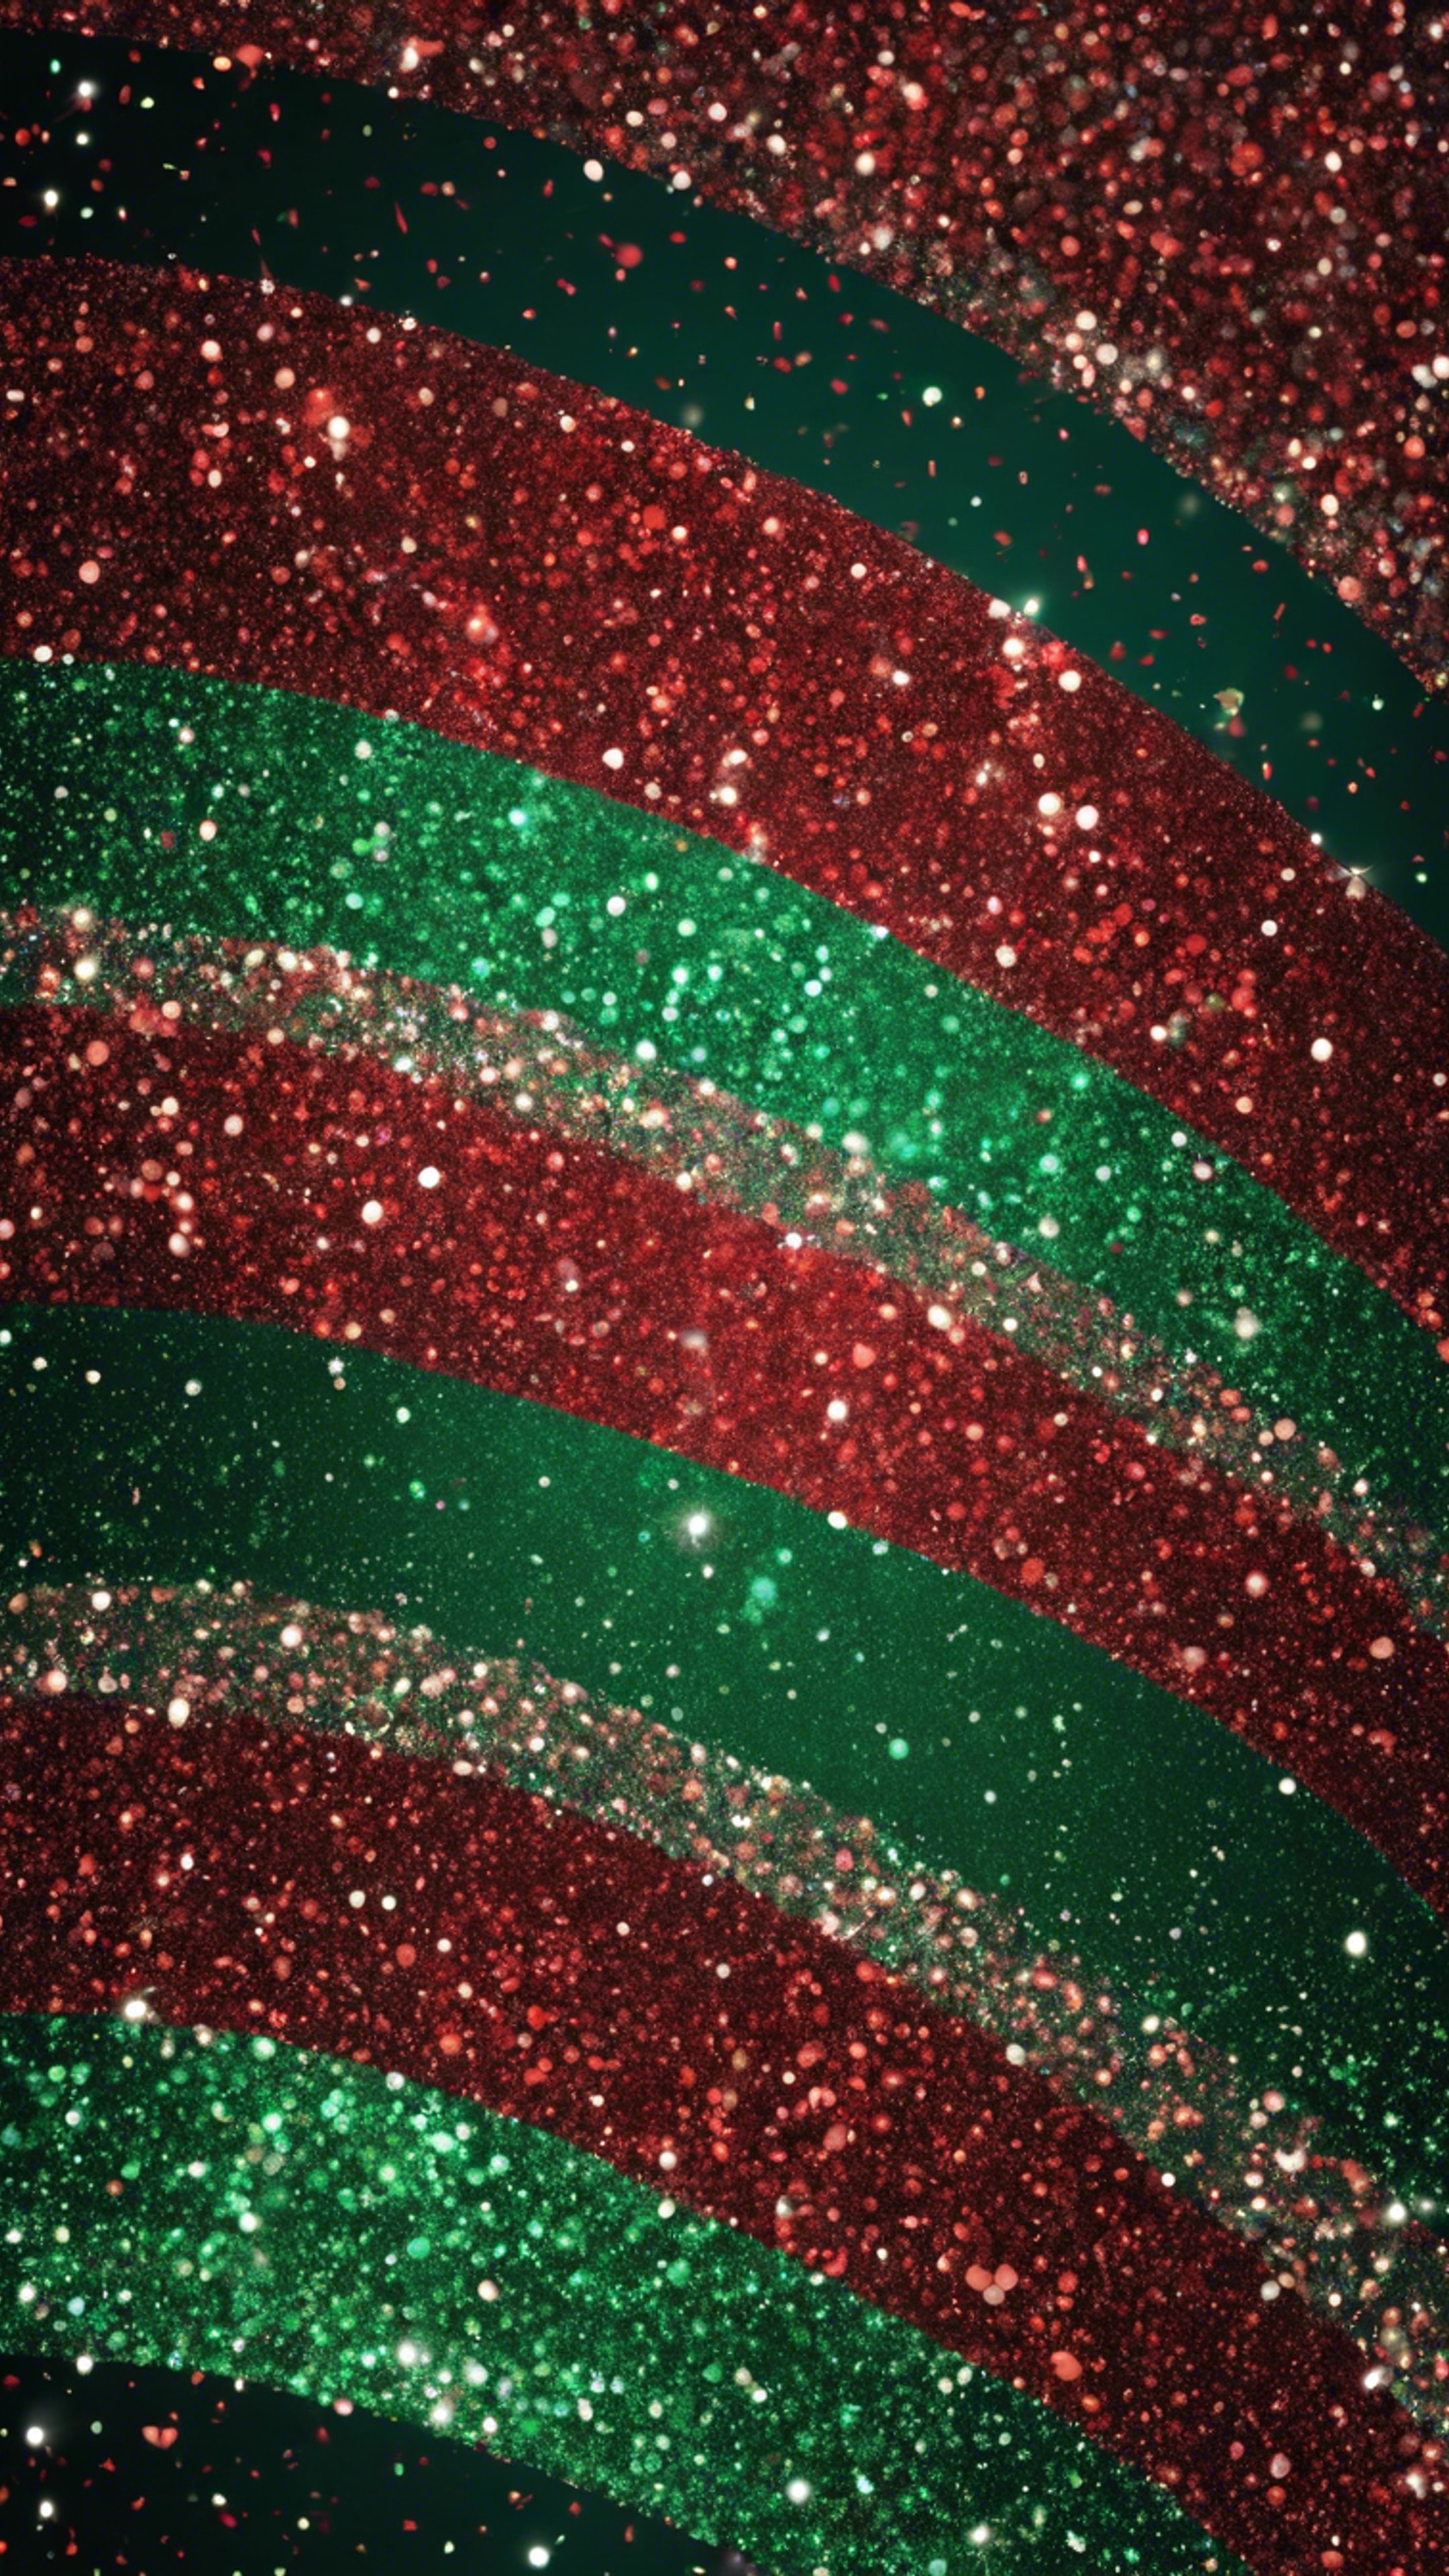 A diagonal stripes pattern made up of red and green glitters 벽지[e53958bfb8c54001b83e]